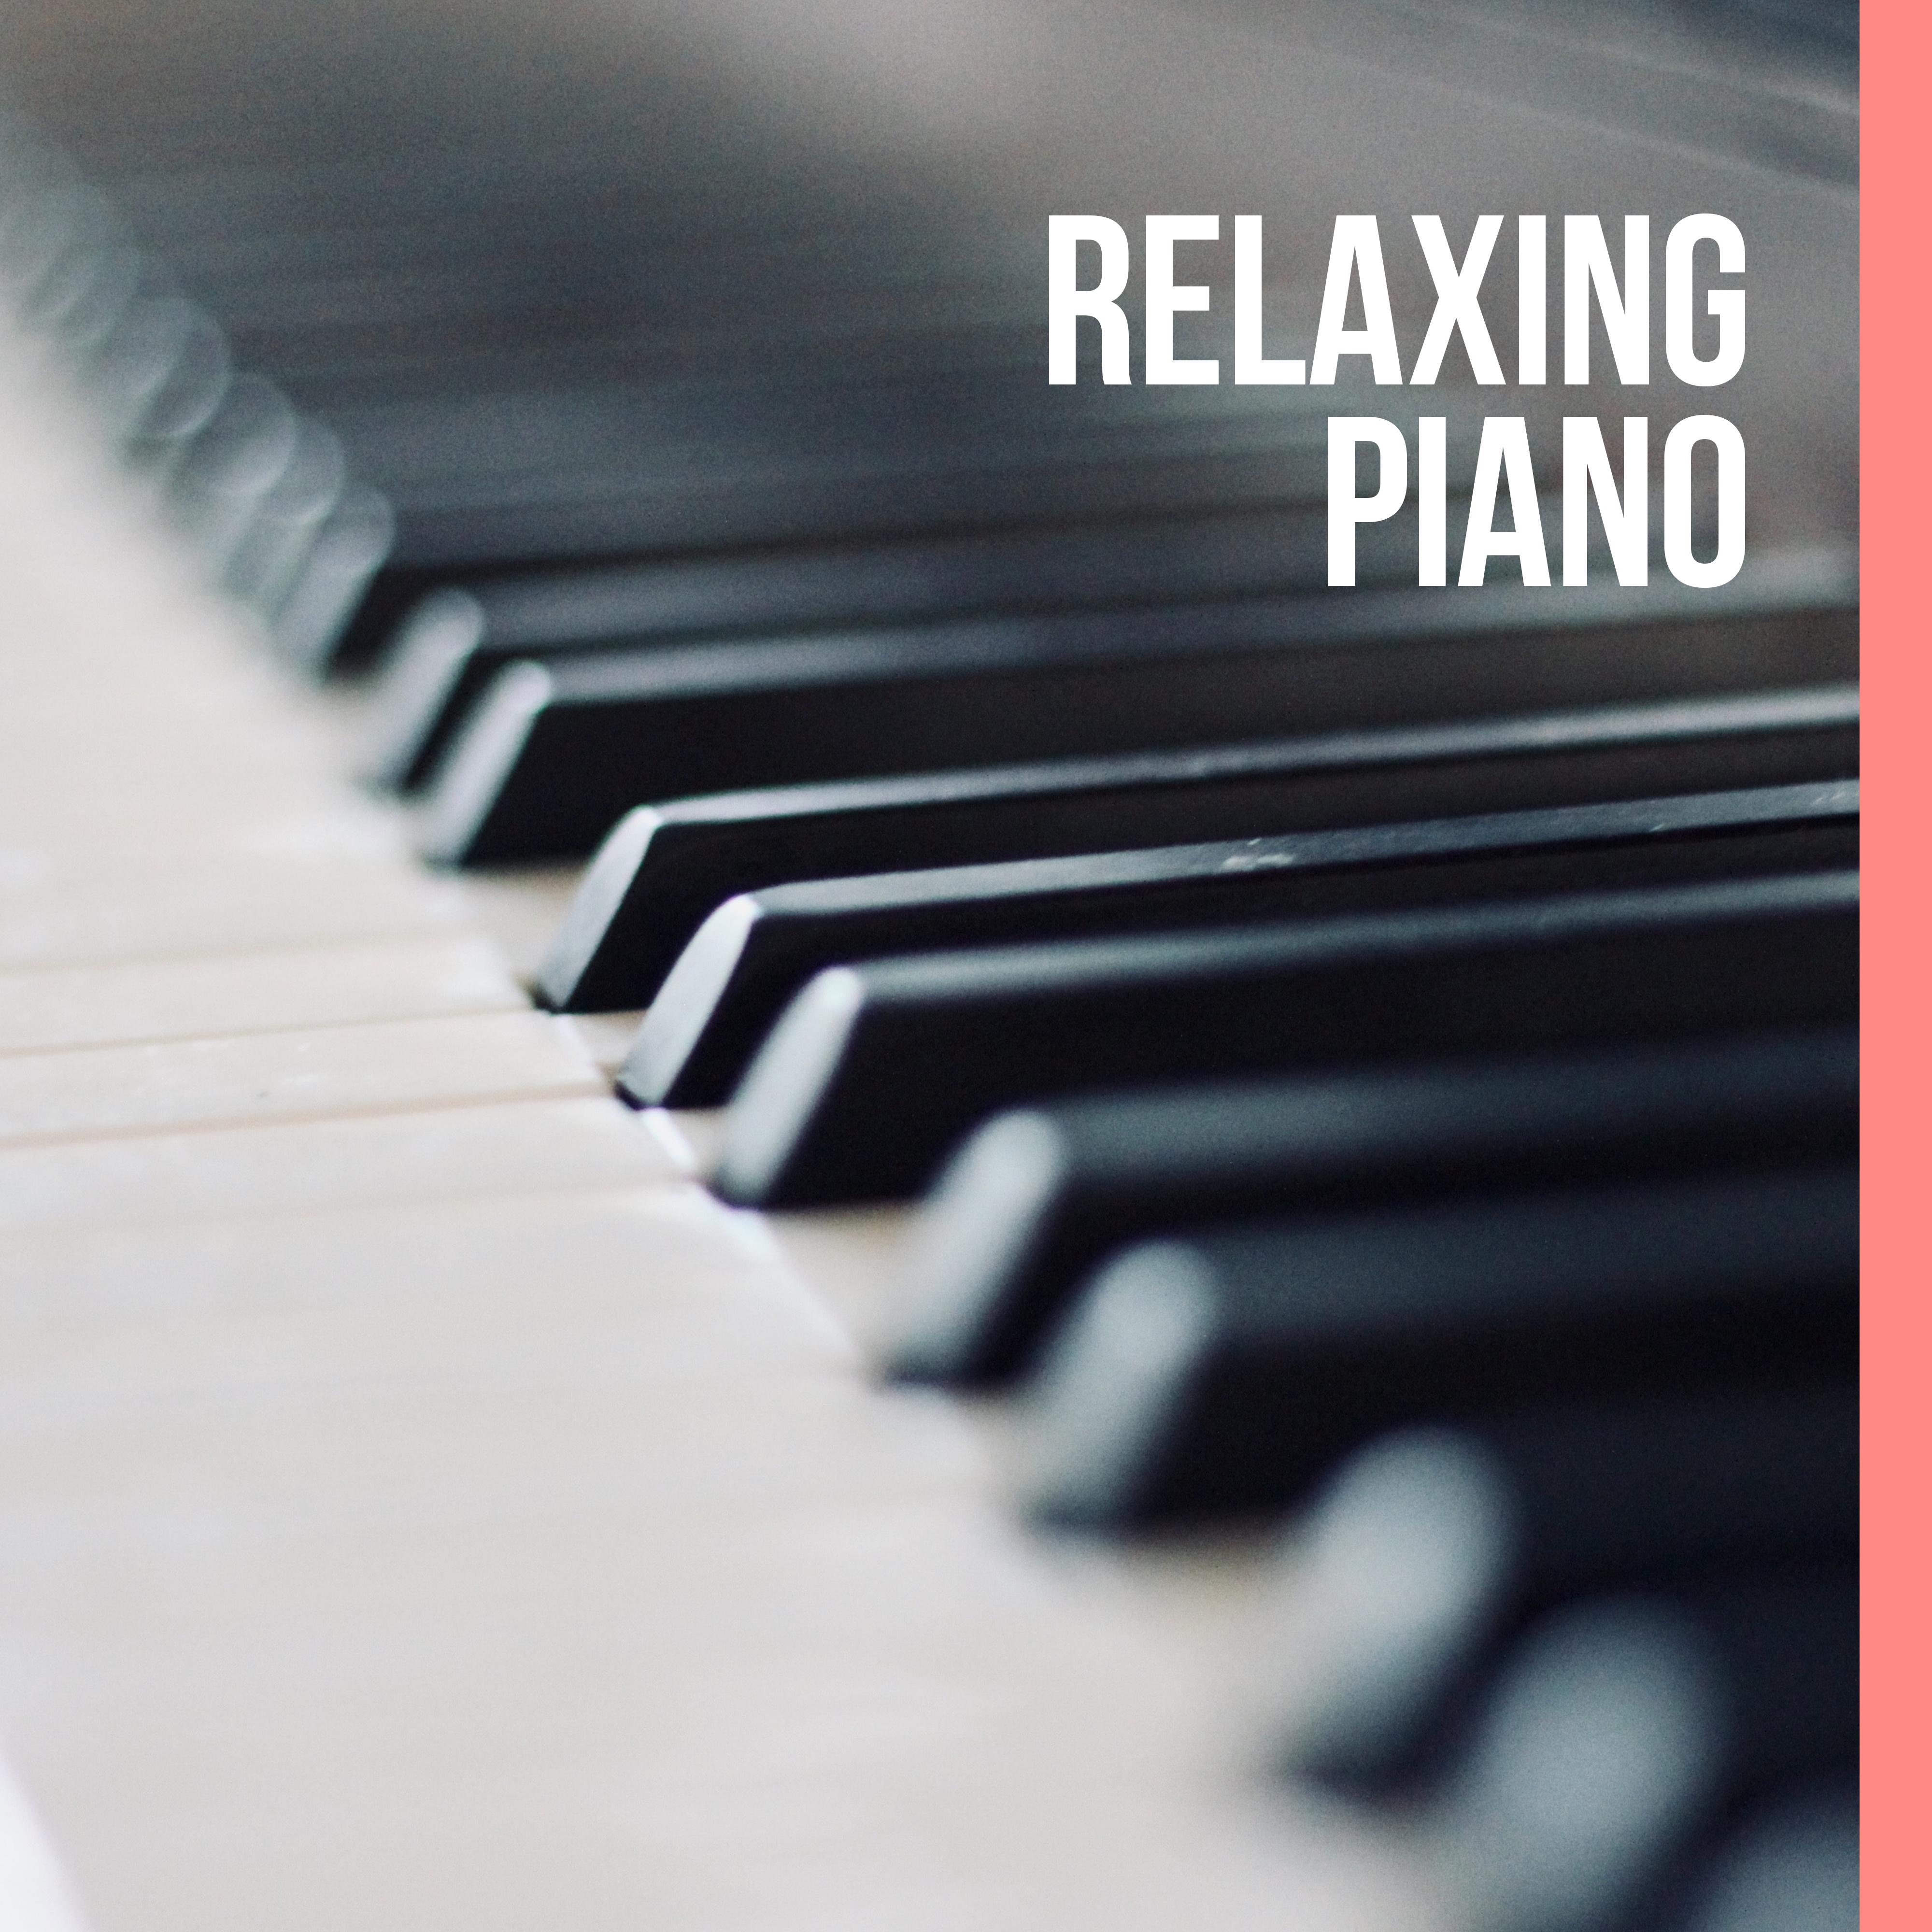 Relaxing Piano  15 Beautiful Instrumental Songs, Jazz Relaxation, Piano Music, Classical Jazz to Relax